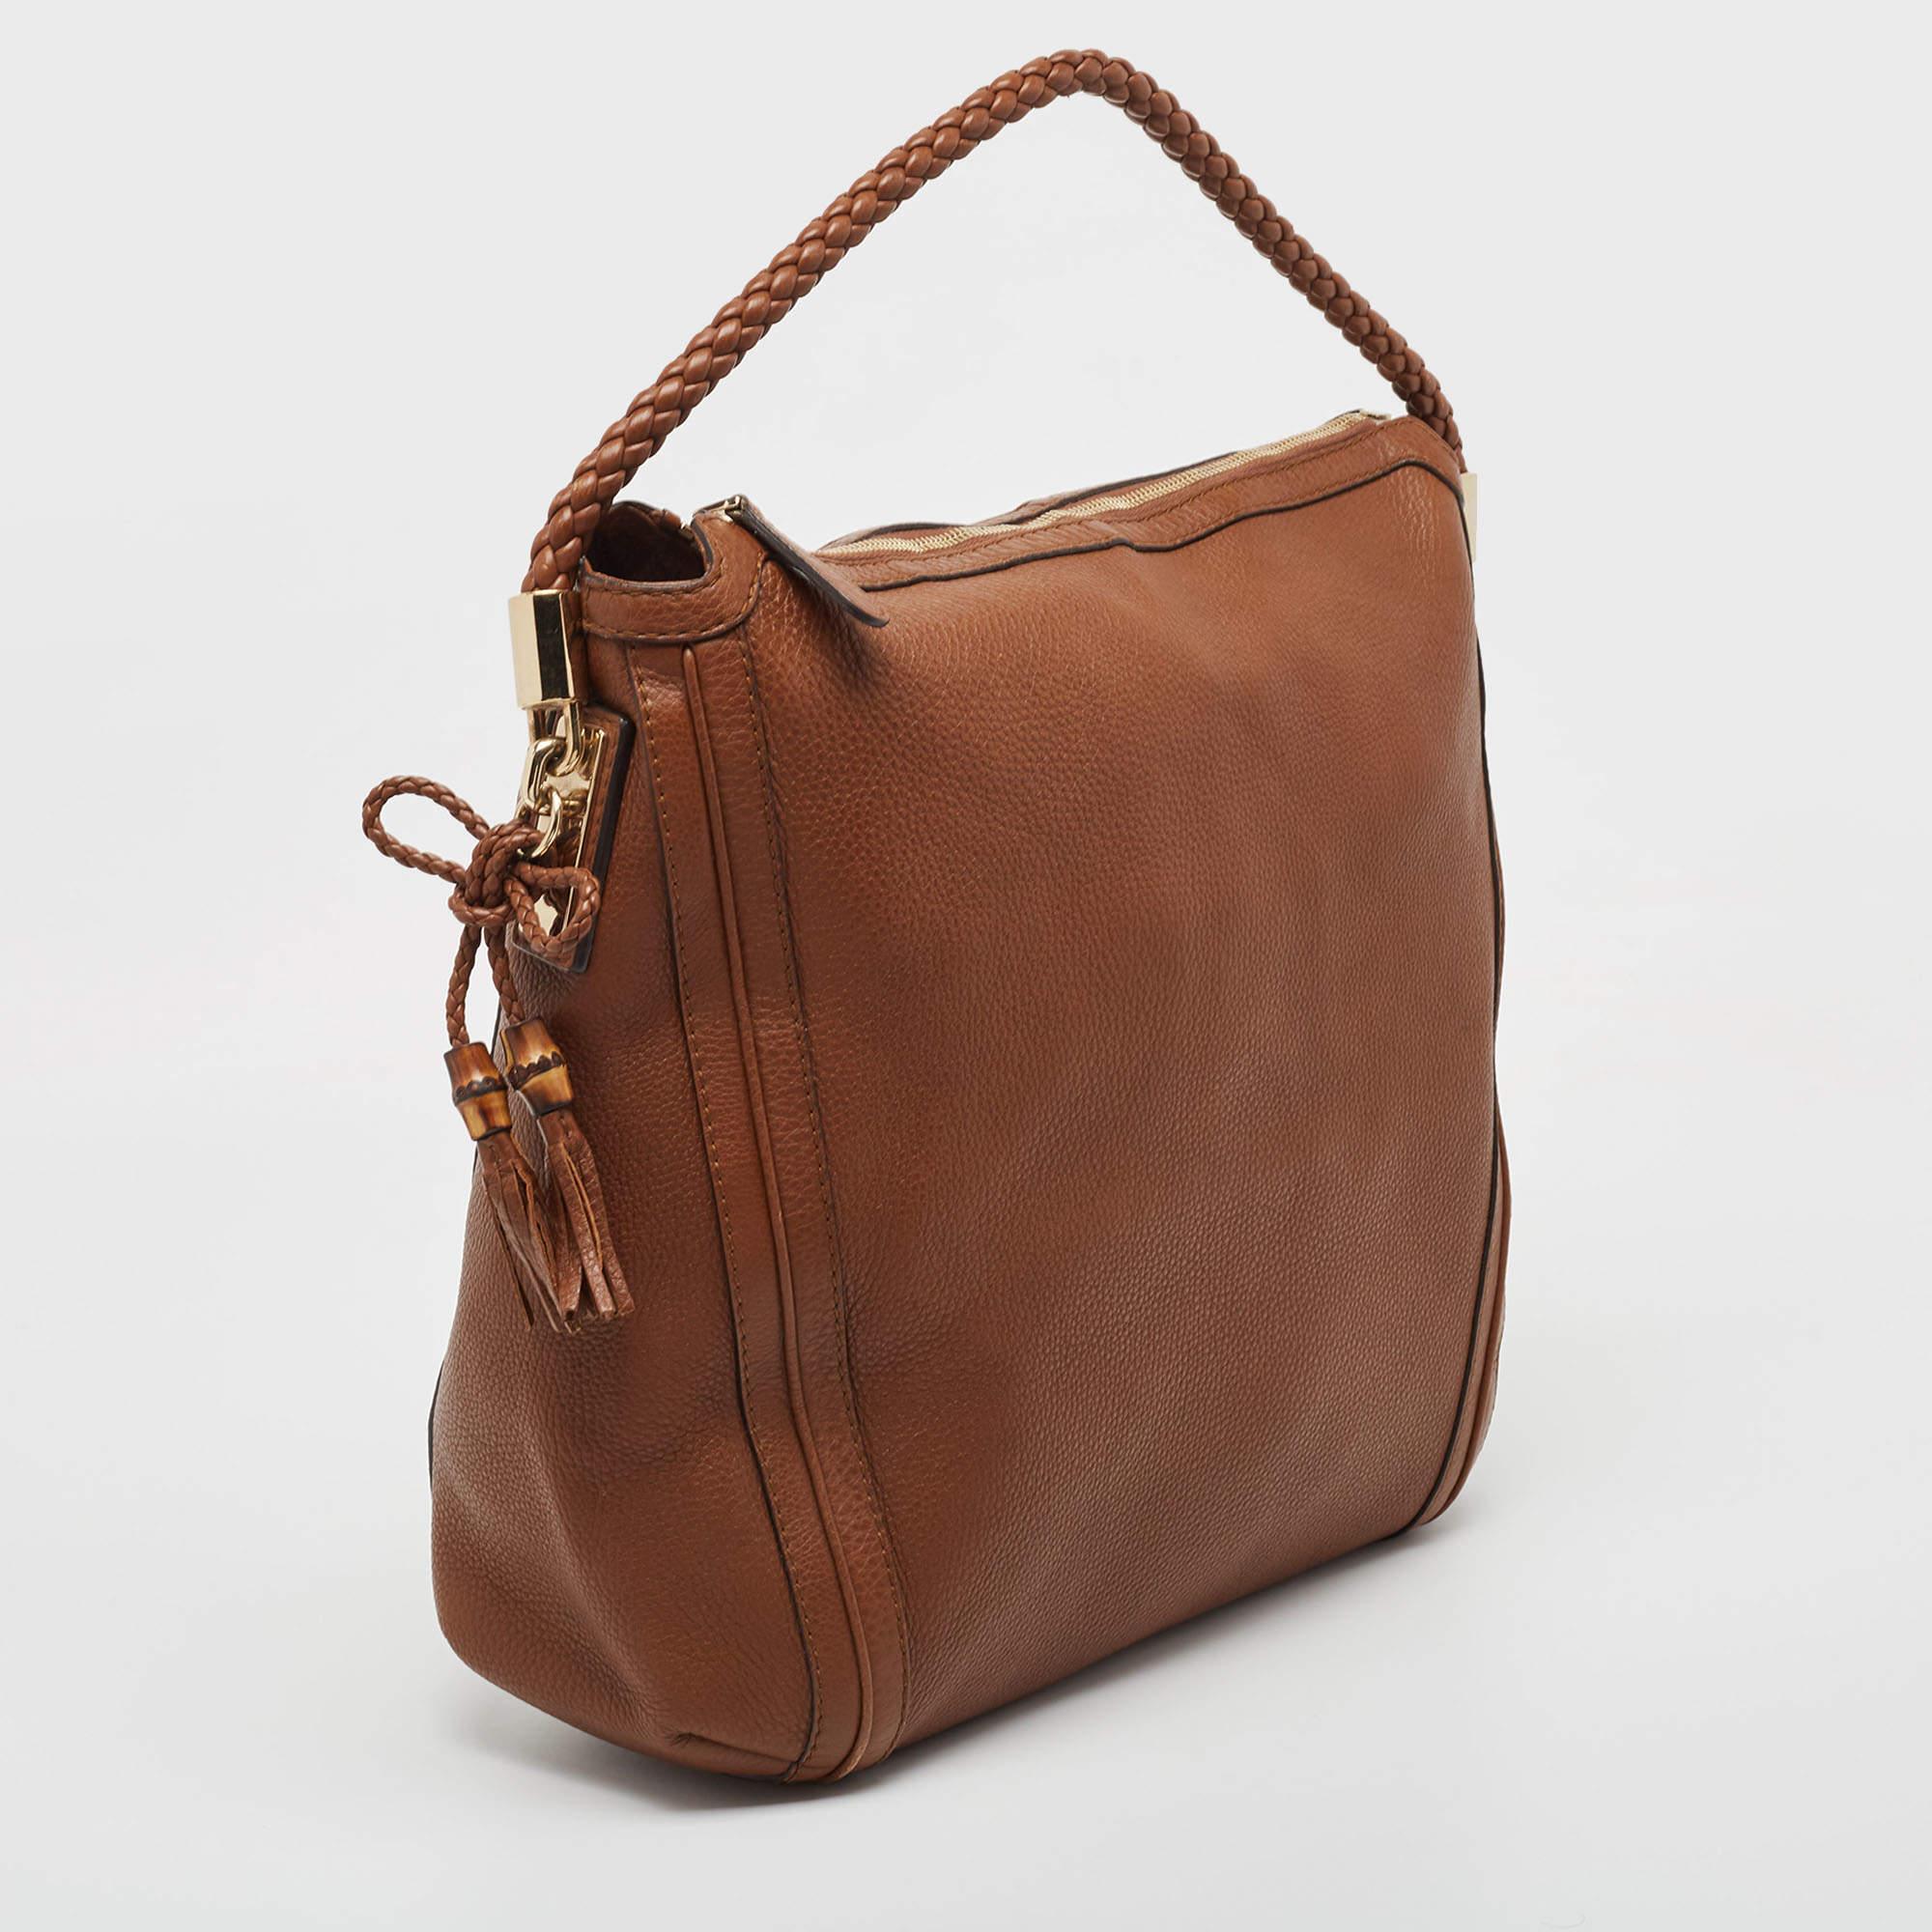 Gucci Brown Leather Large Bella Hobo 2